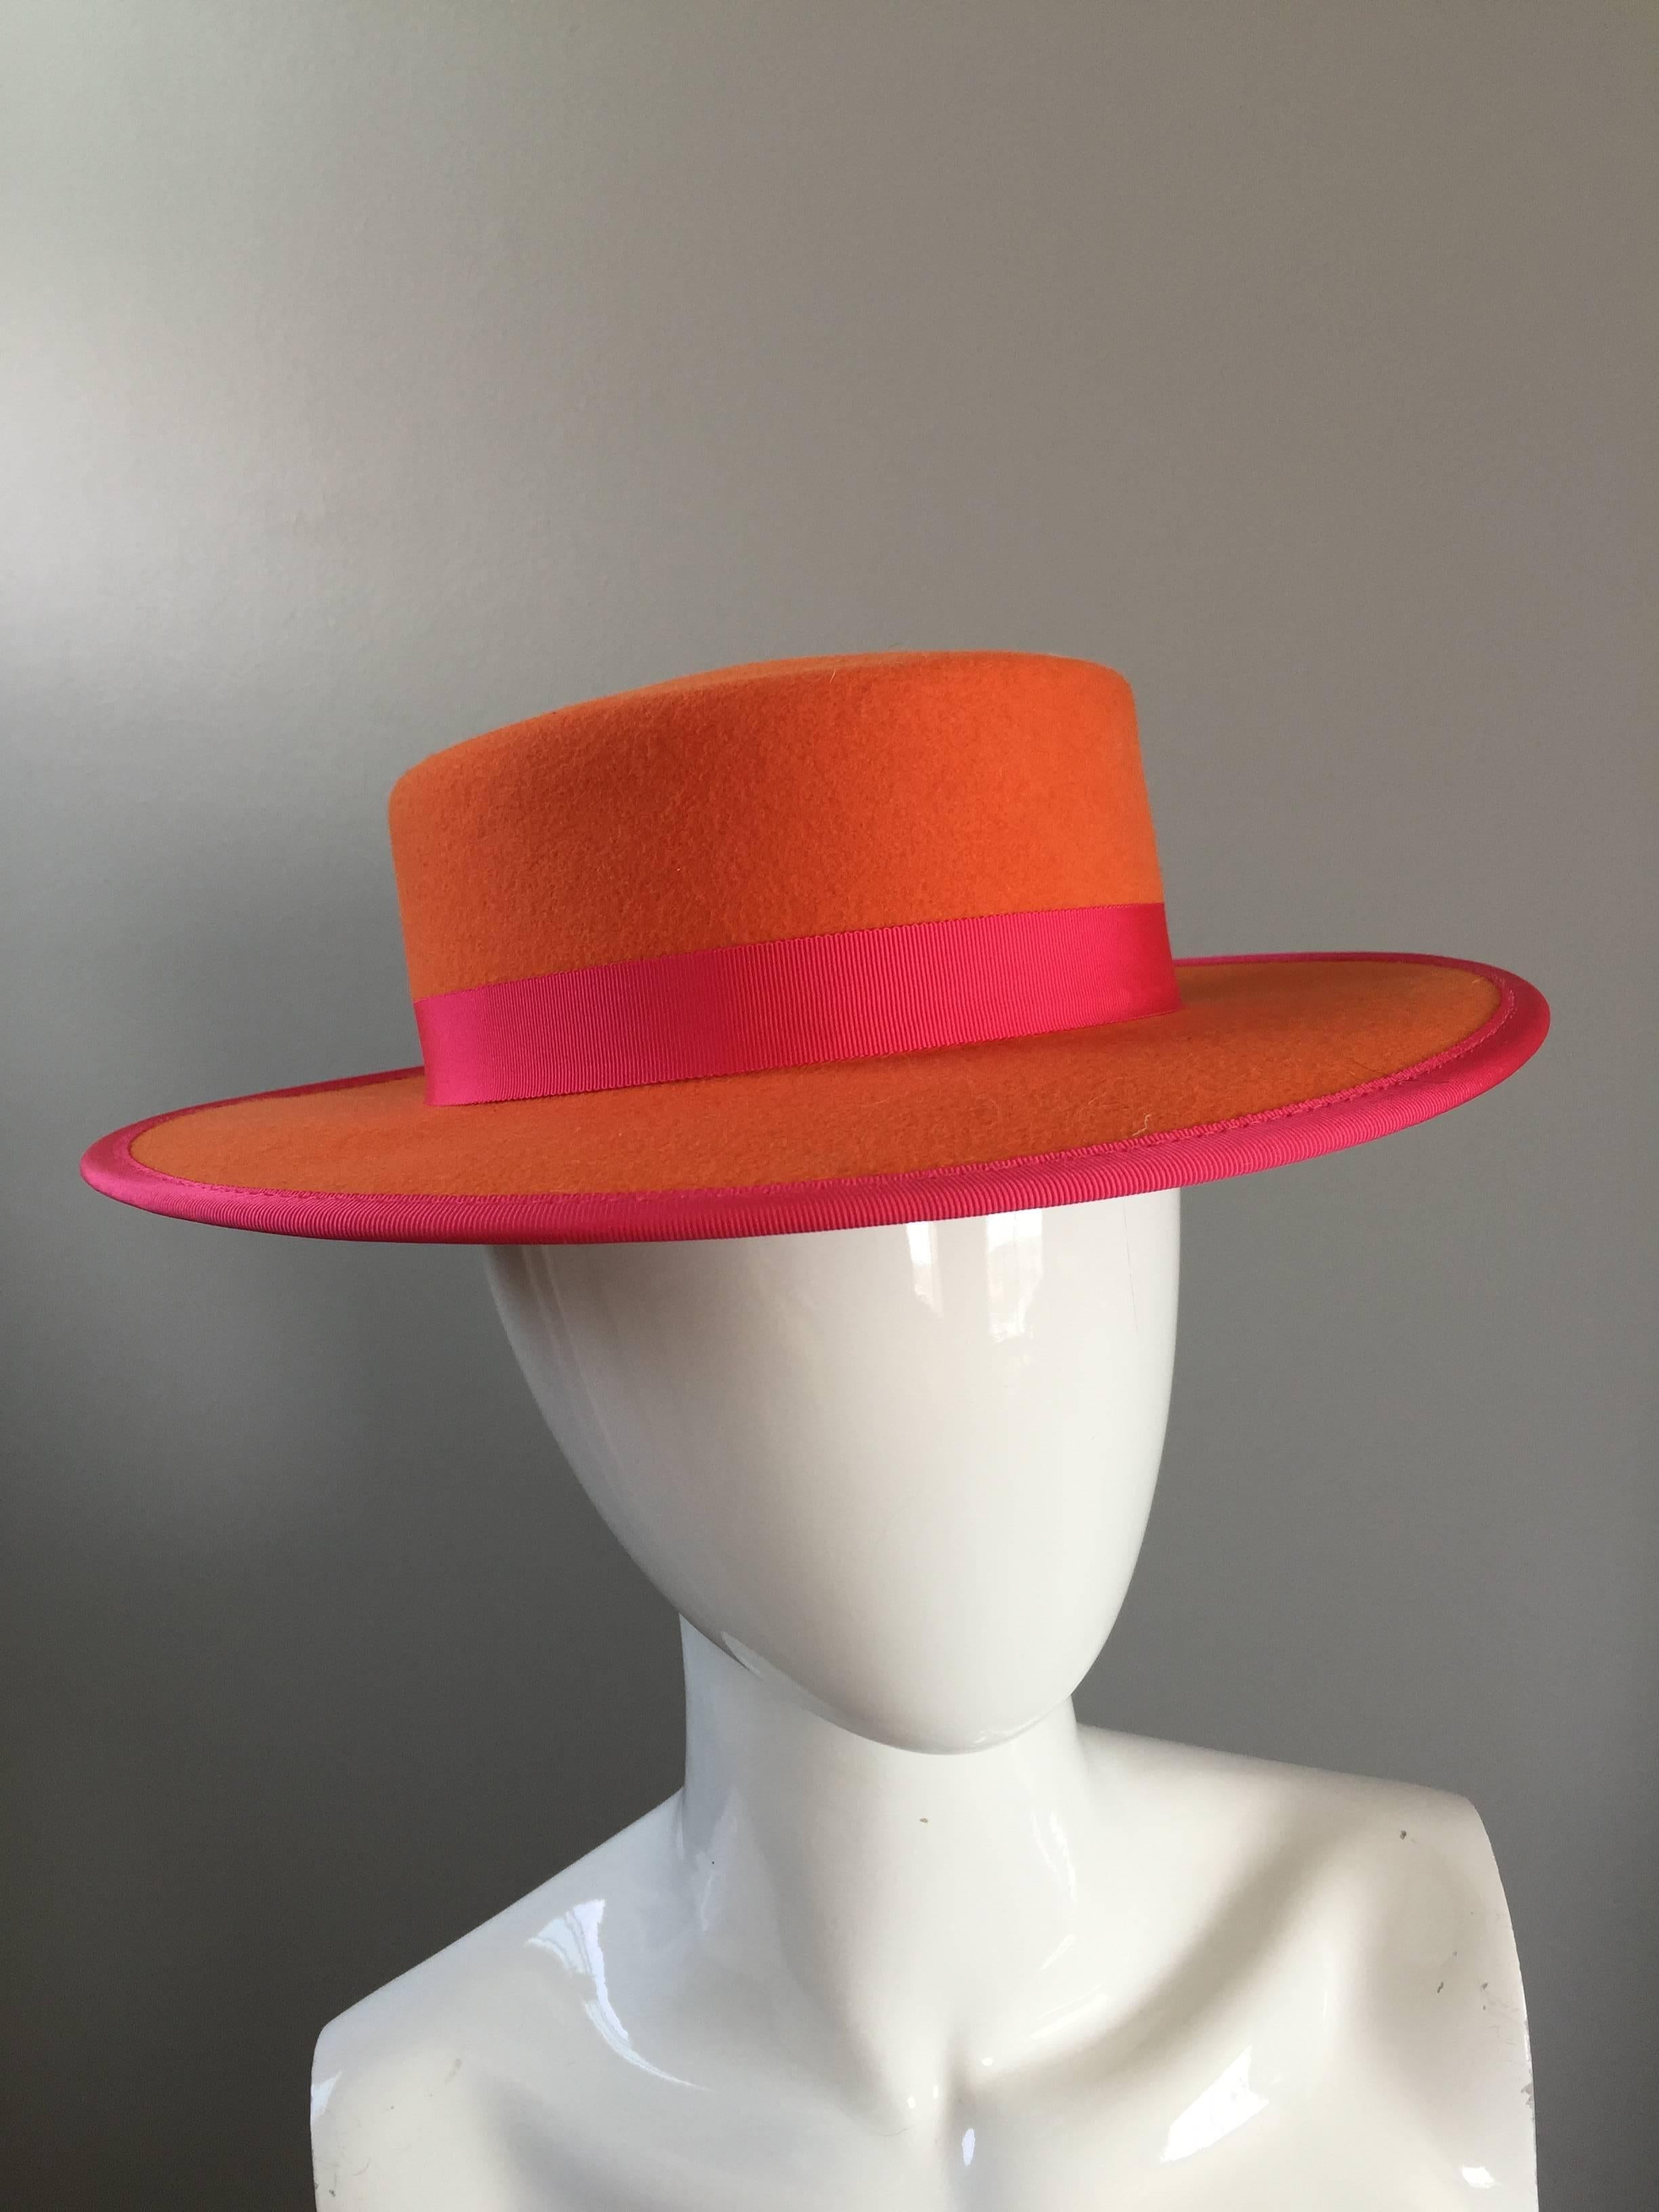 Amazing vintage TINA TOO by the BOLLMAN HAT COMPANY bright orange and hot pink hat! Soft wool doeskin felt. Pink silk grosgrain ribbon around the hat. Can be worn multiple ways, and will fit most head sizes due to shape. Made in USA
Interior